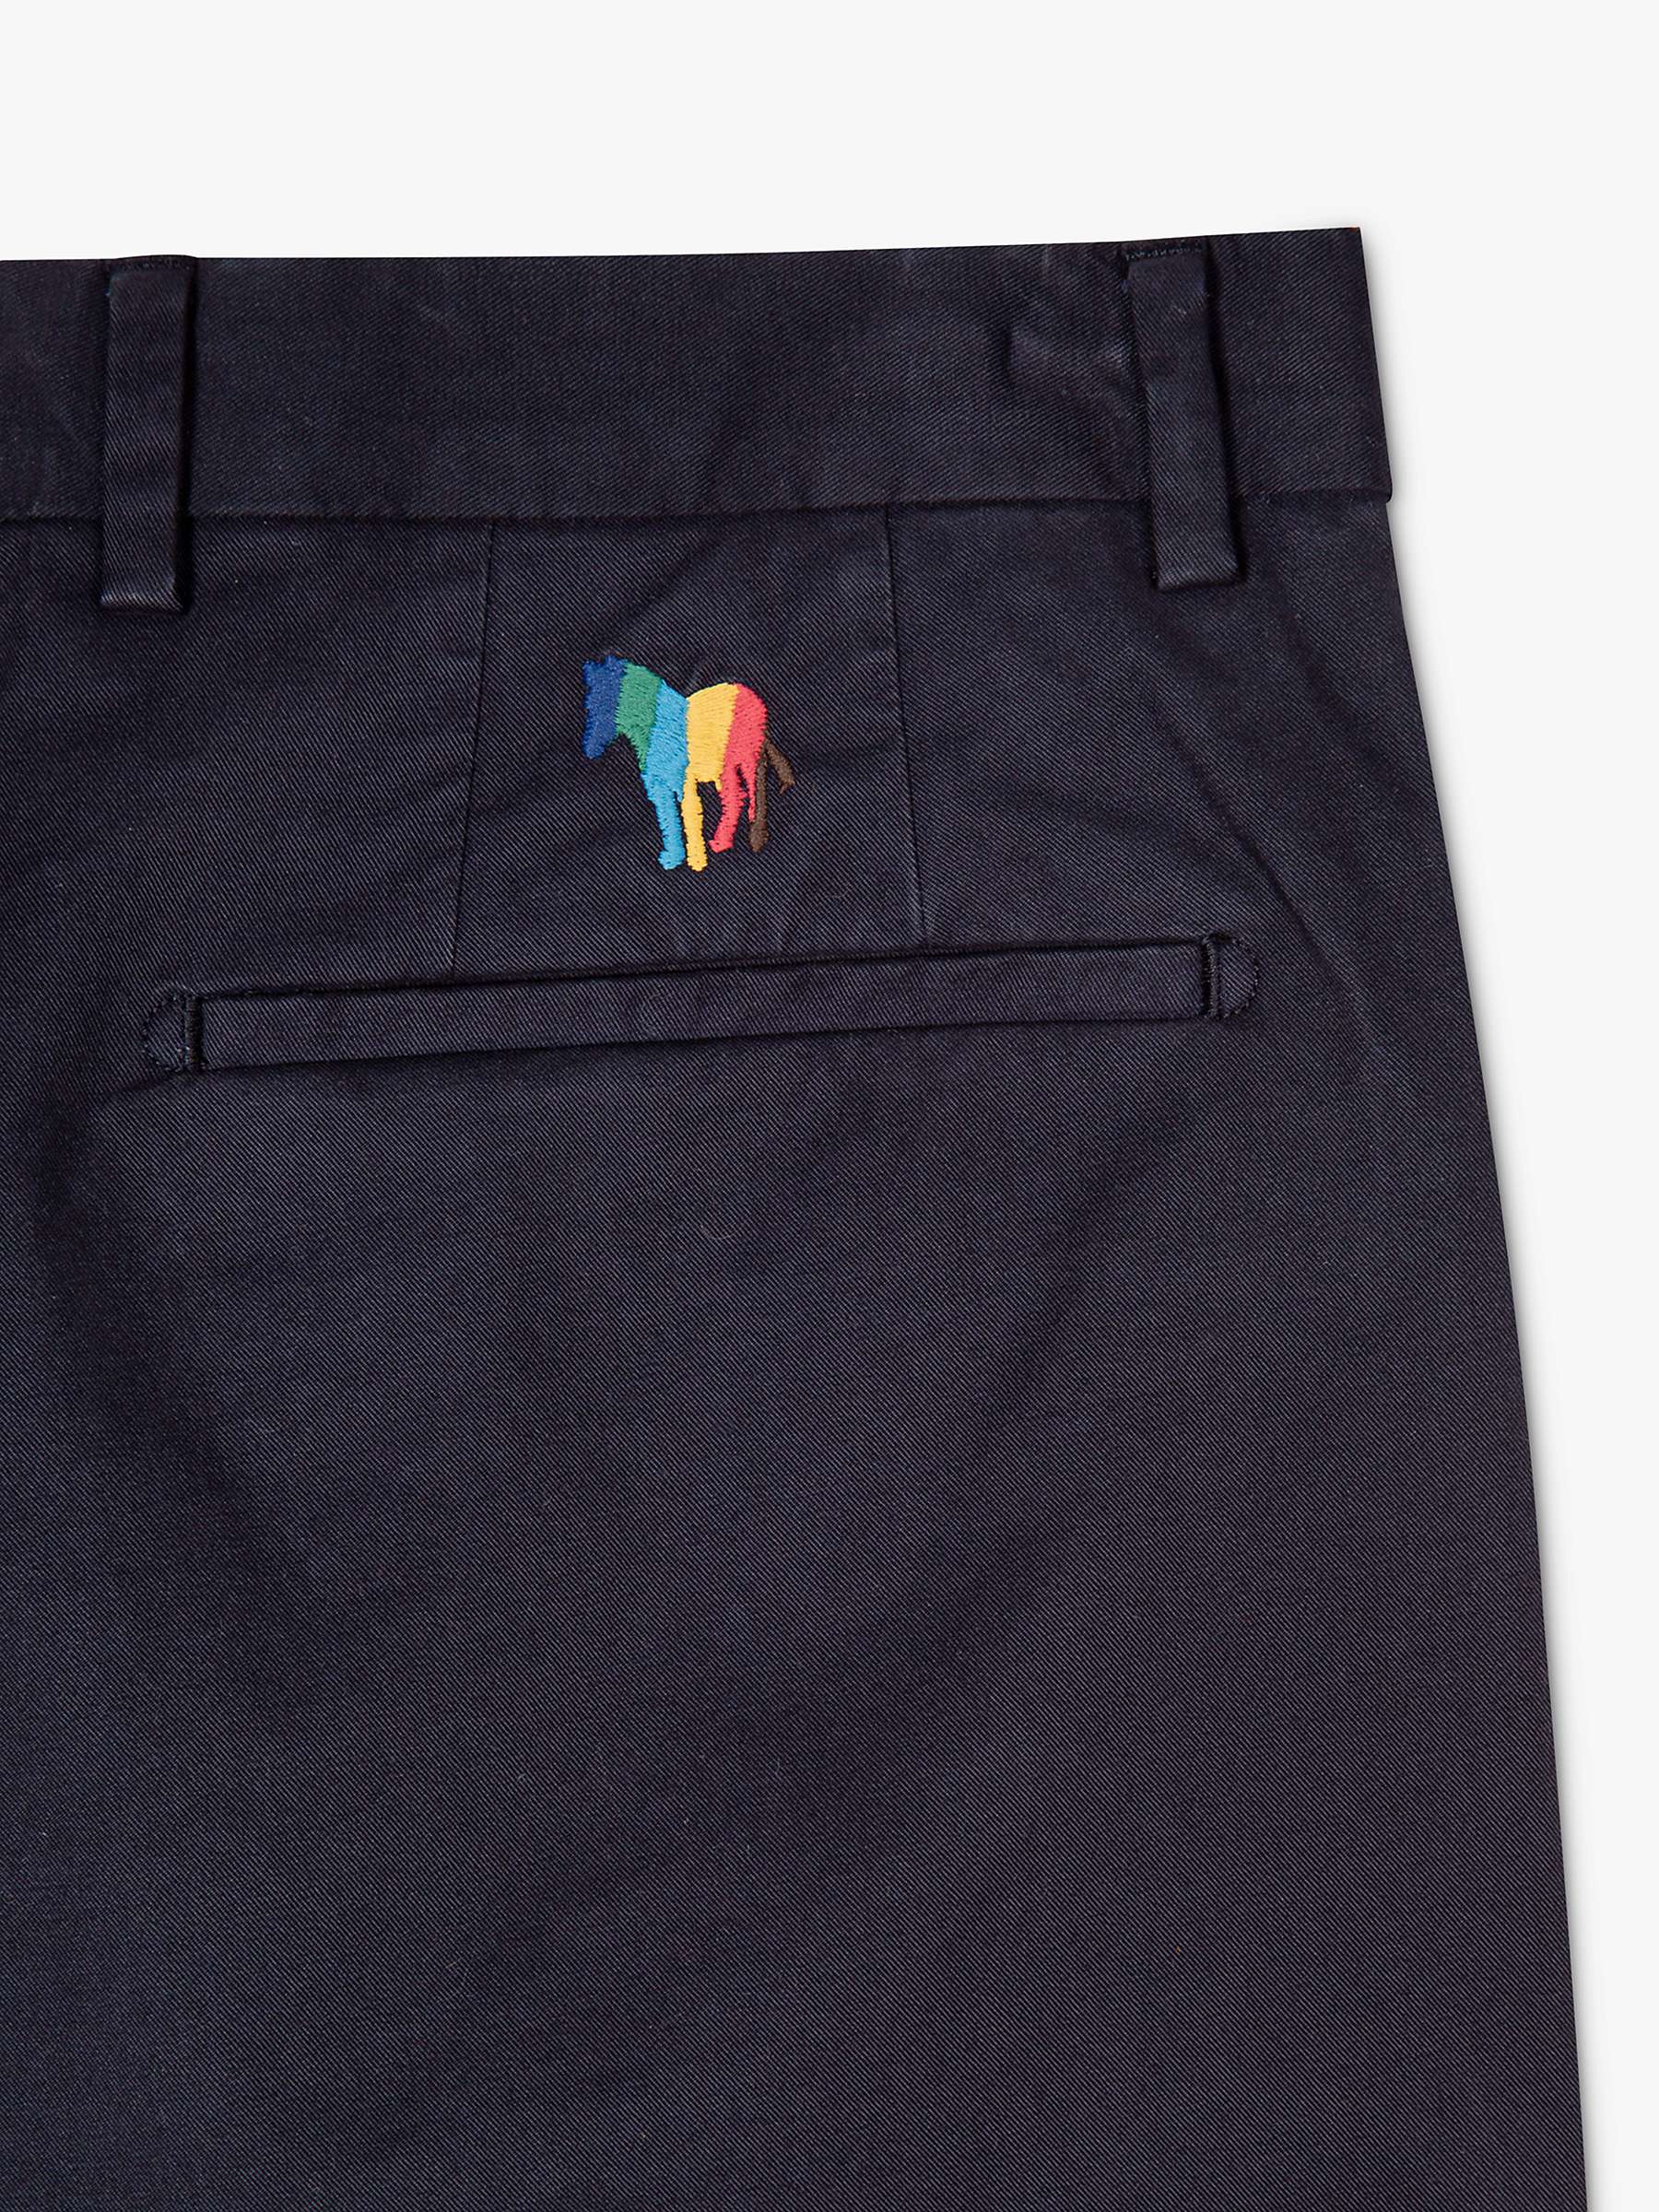 Buy Paul Smith Mid Clean Chinos, Blue Online at johnlewis.com